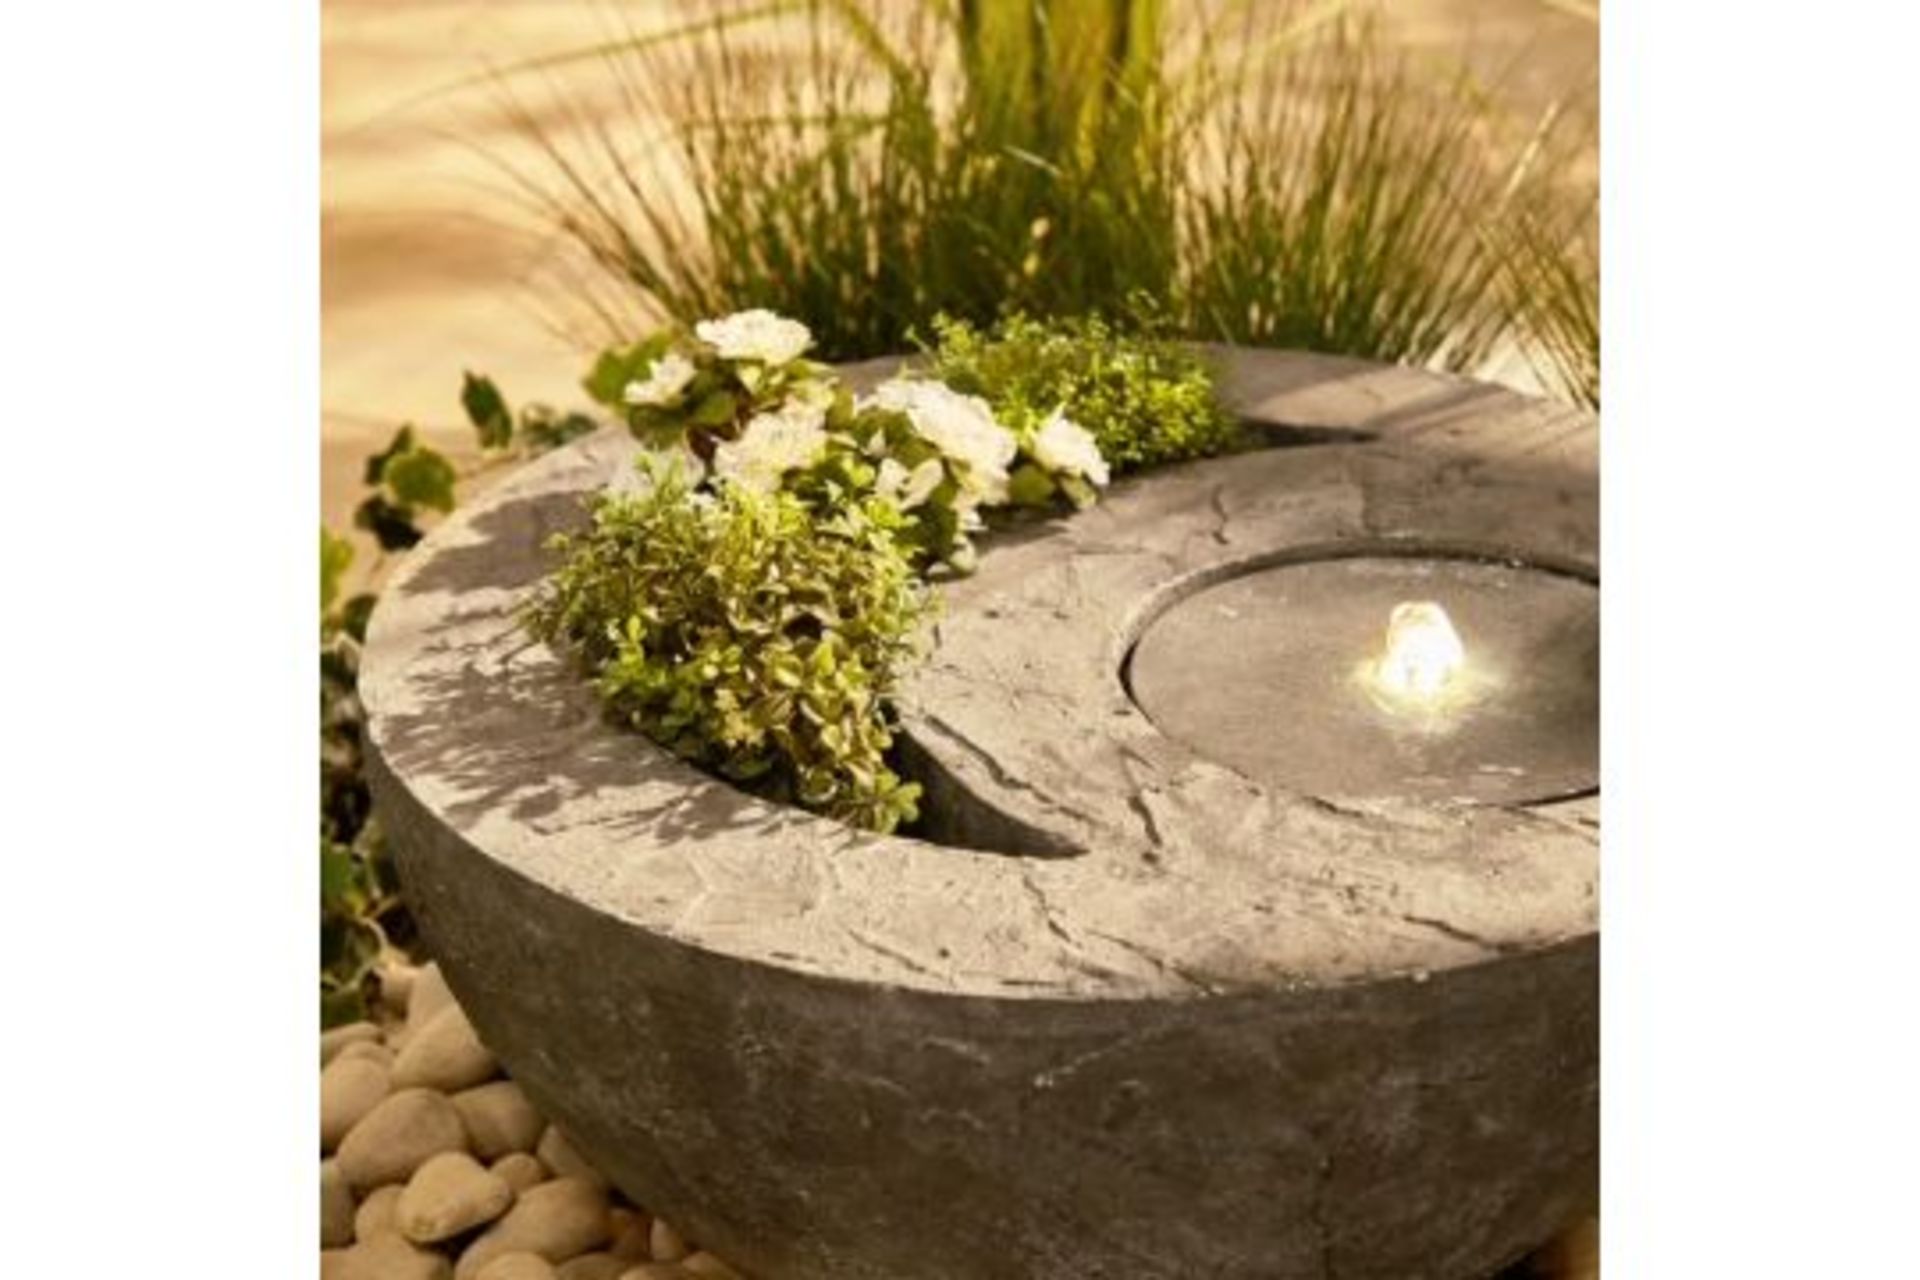 New & Boxed Dual Water Feature and Planter. RRP £299.99 (REF726) - Garden Bowl Design Planter, - Image 5 of 6